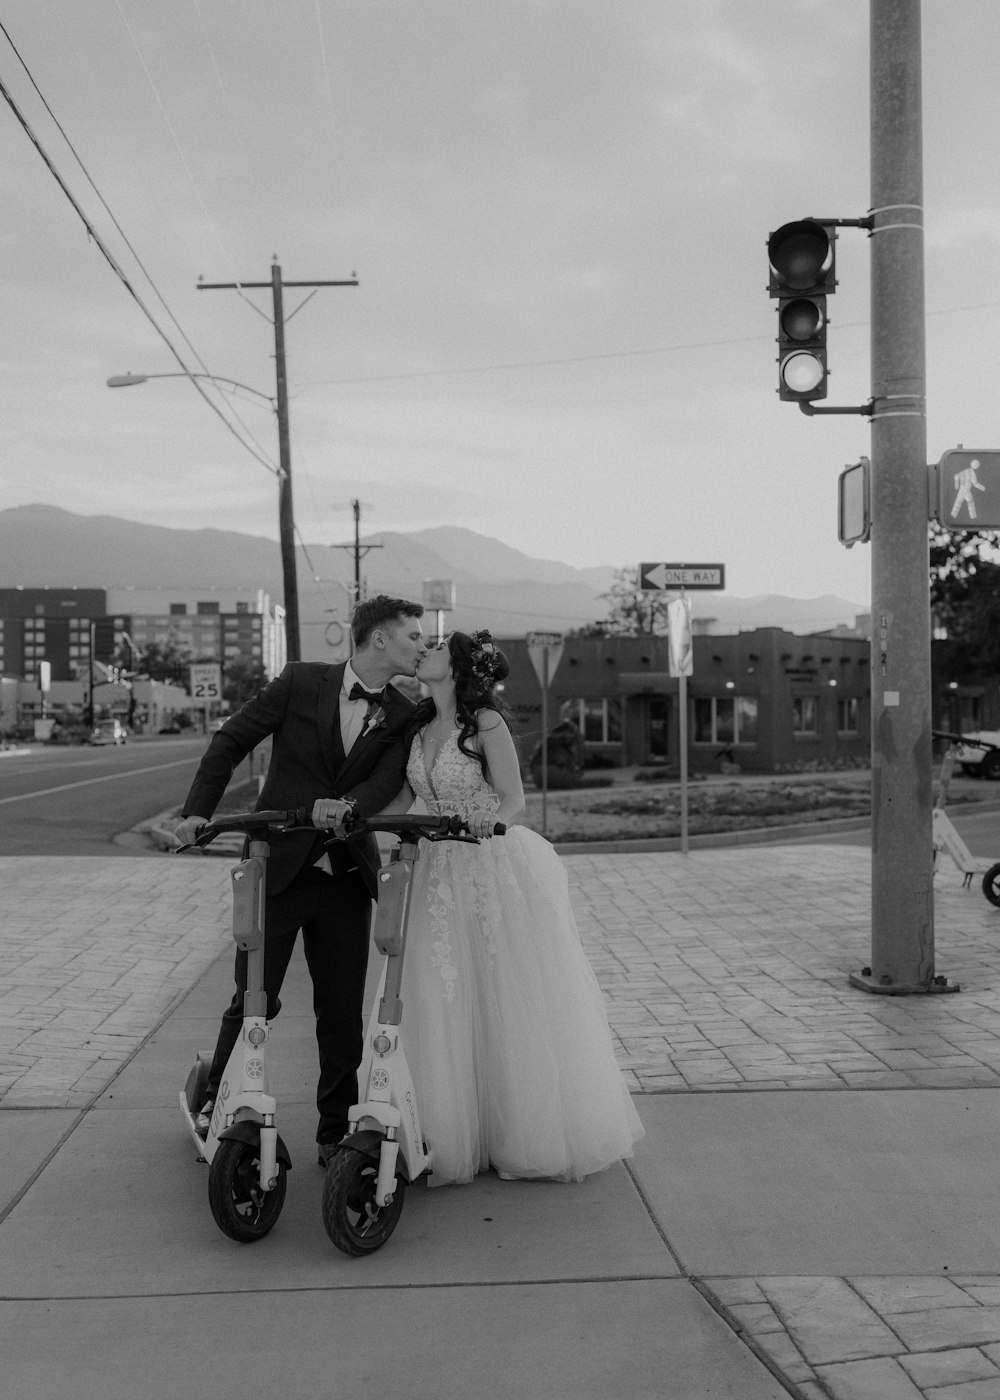 a bride and groom on a bicycle